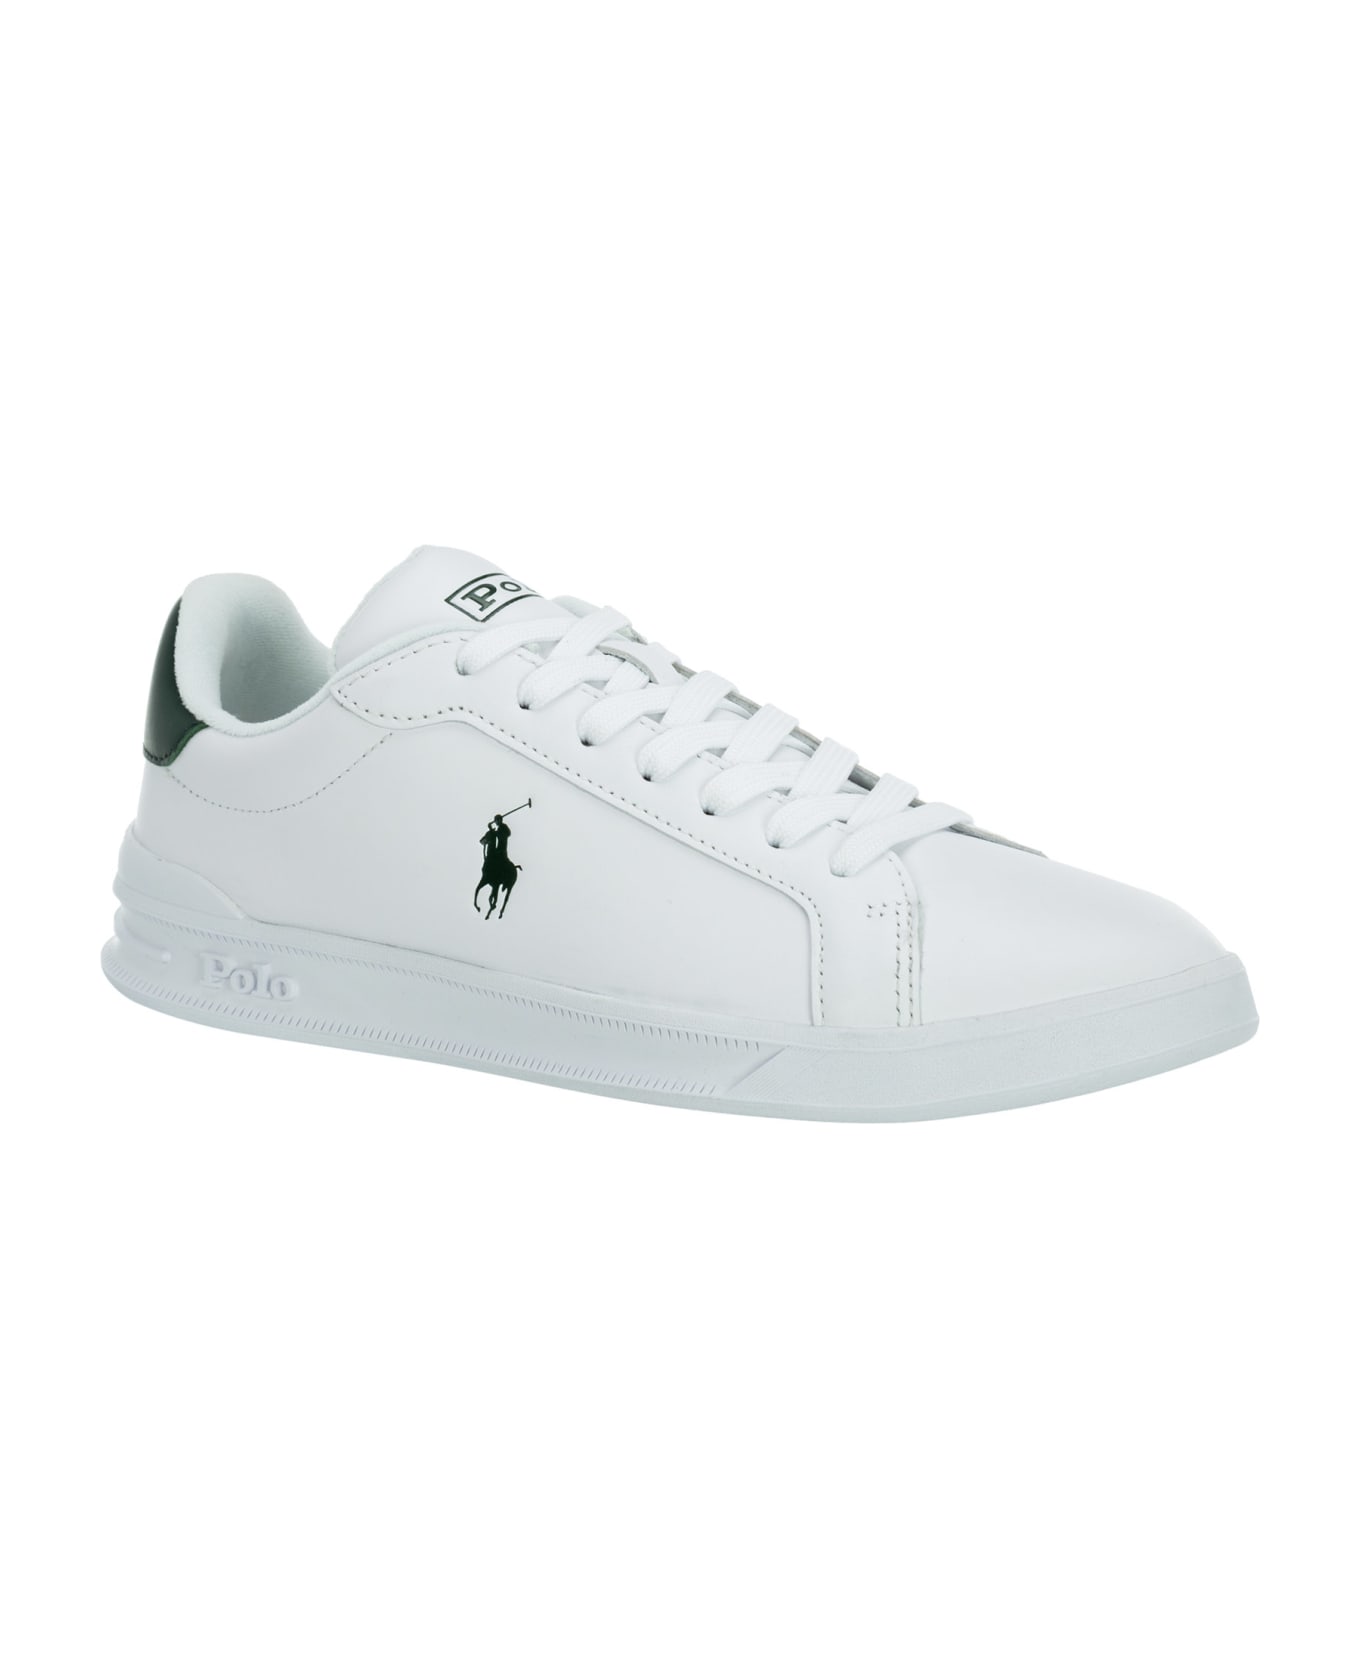 Polo Ralph Lauren Court Ii Heritage Leather Sneakers - White/green スニーカー